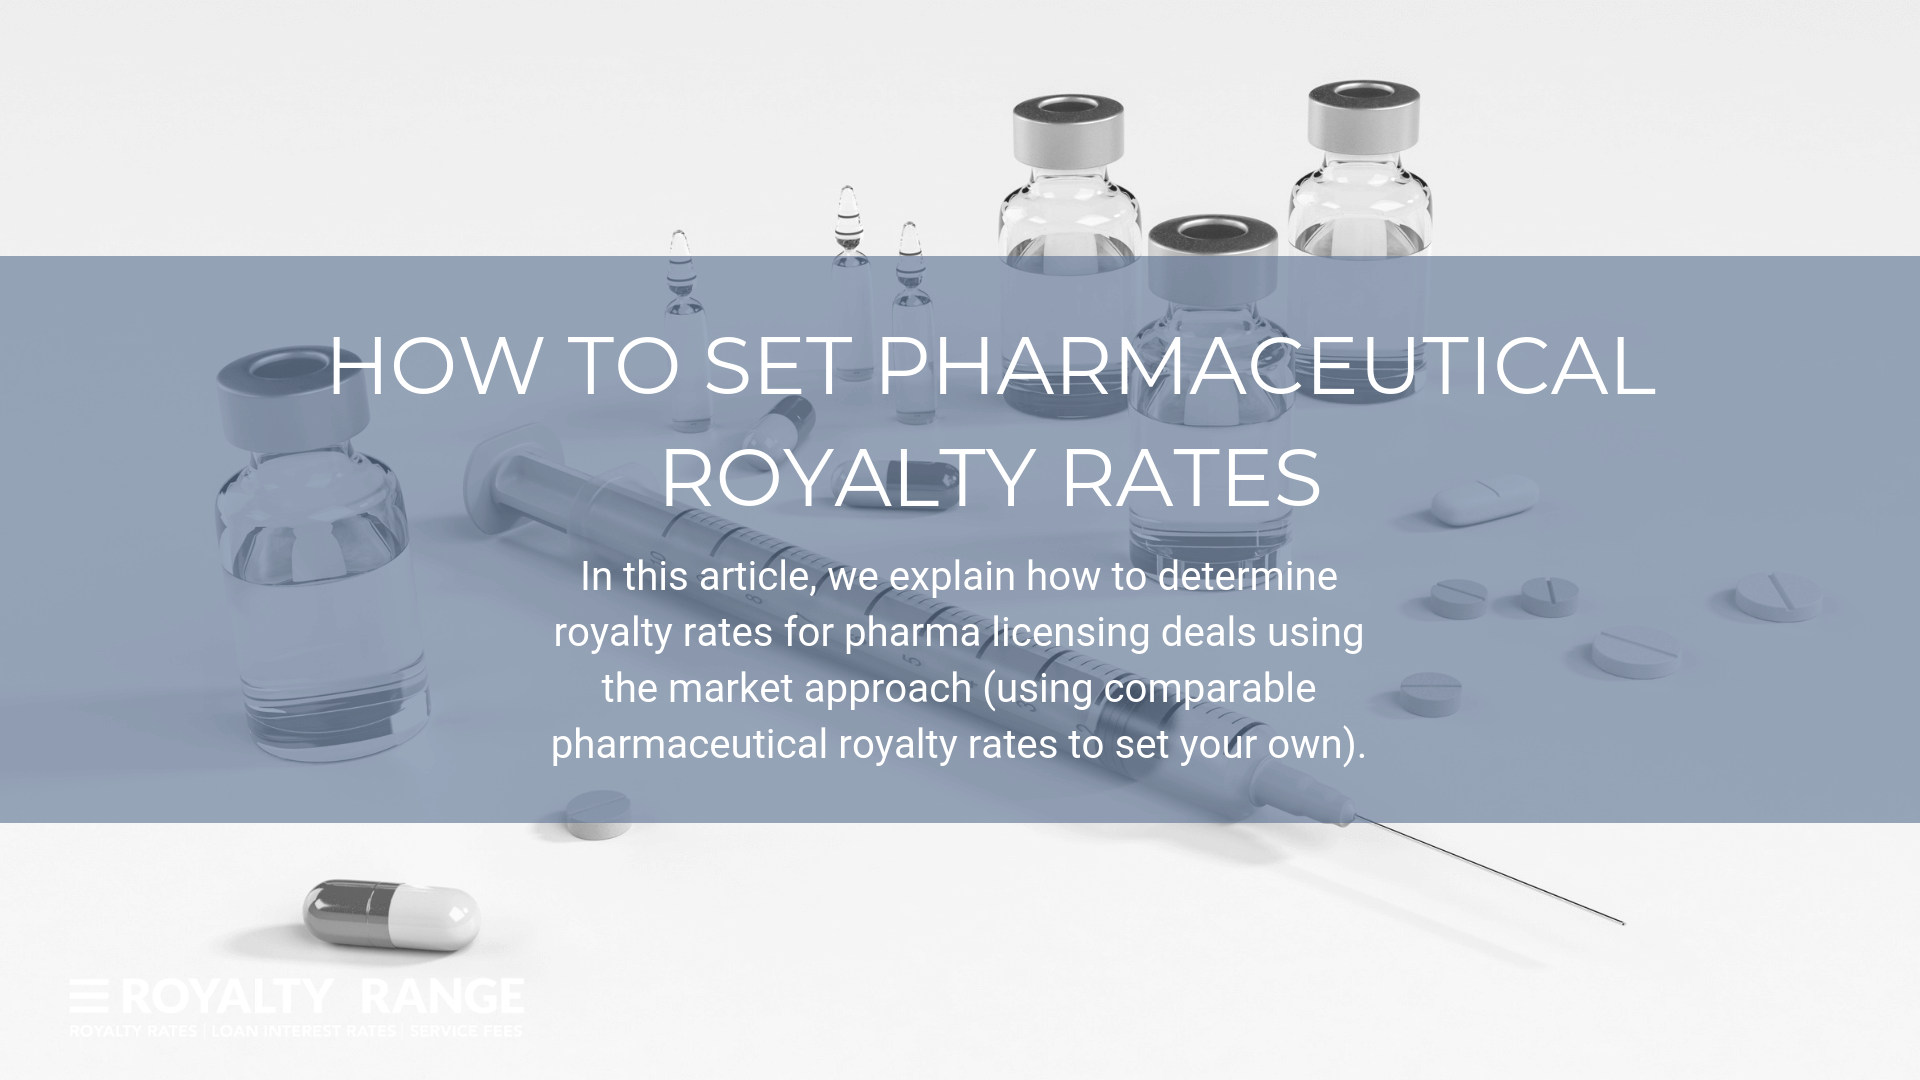 How to set pharmaceutical royalty rates